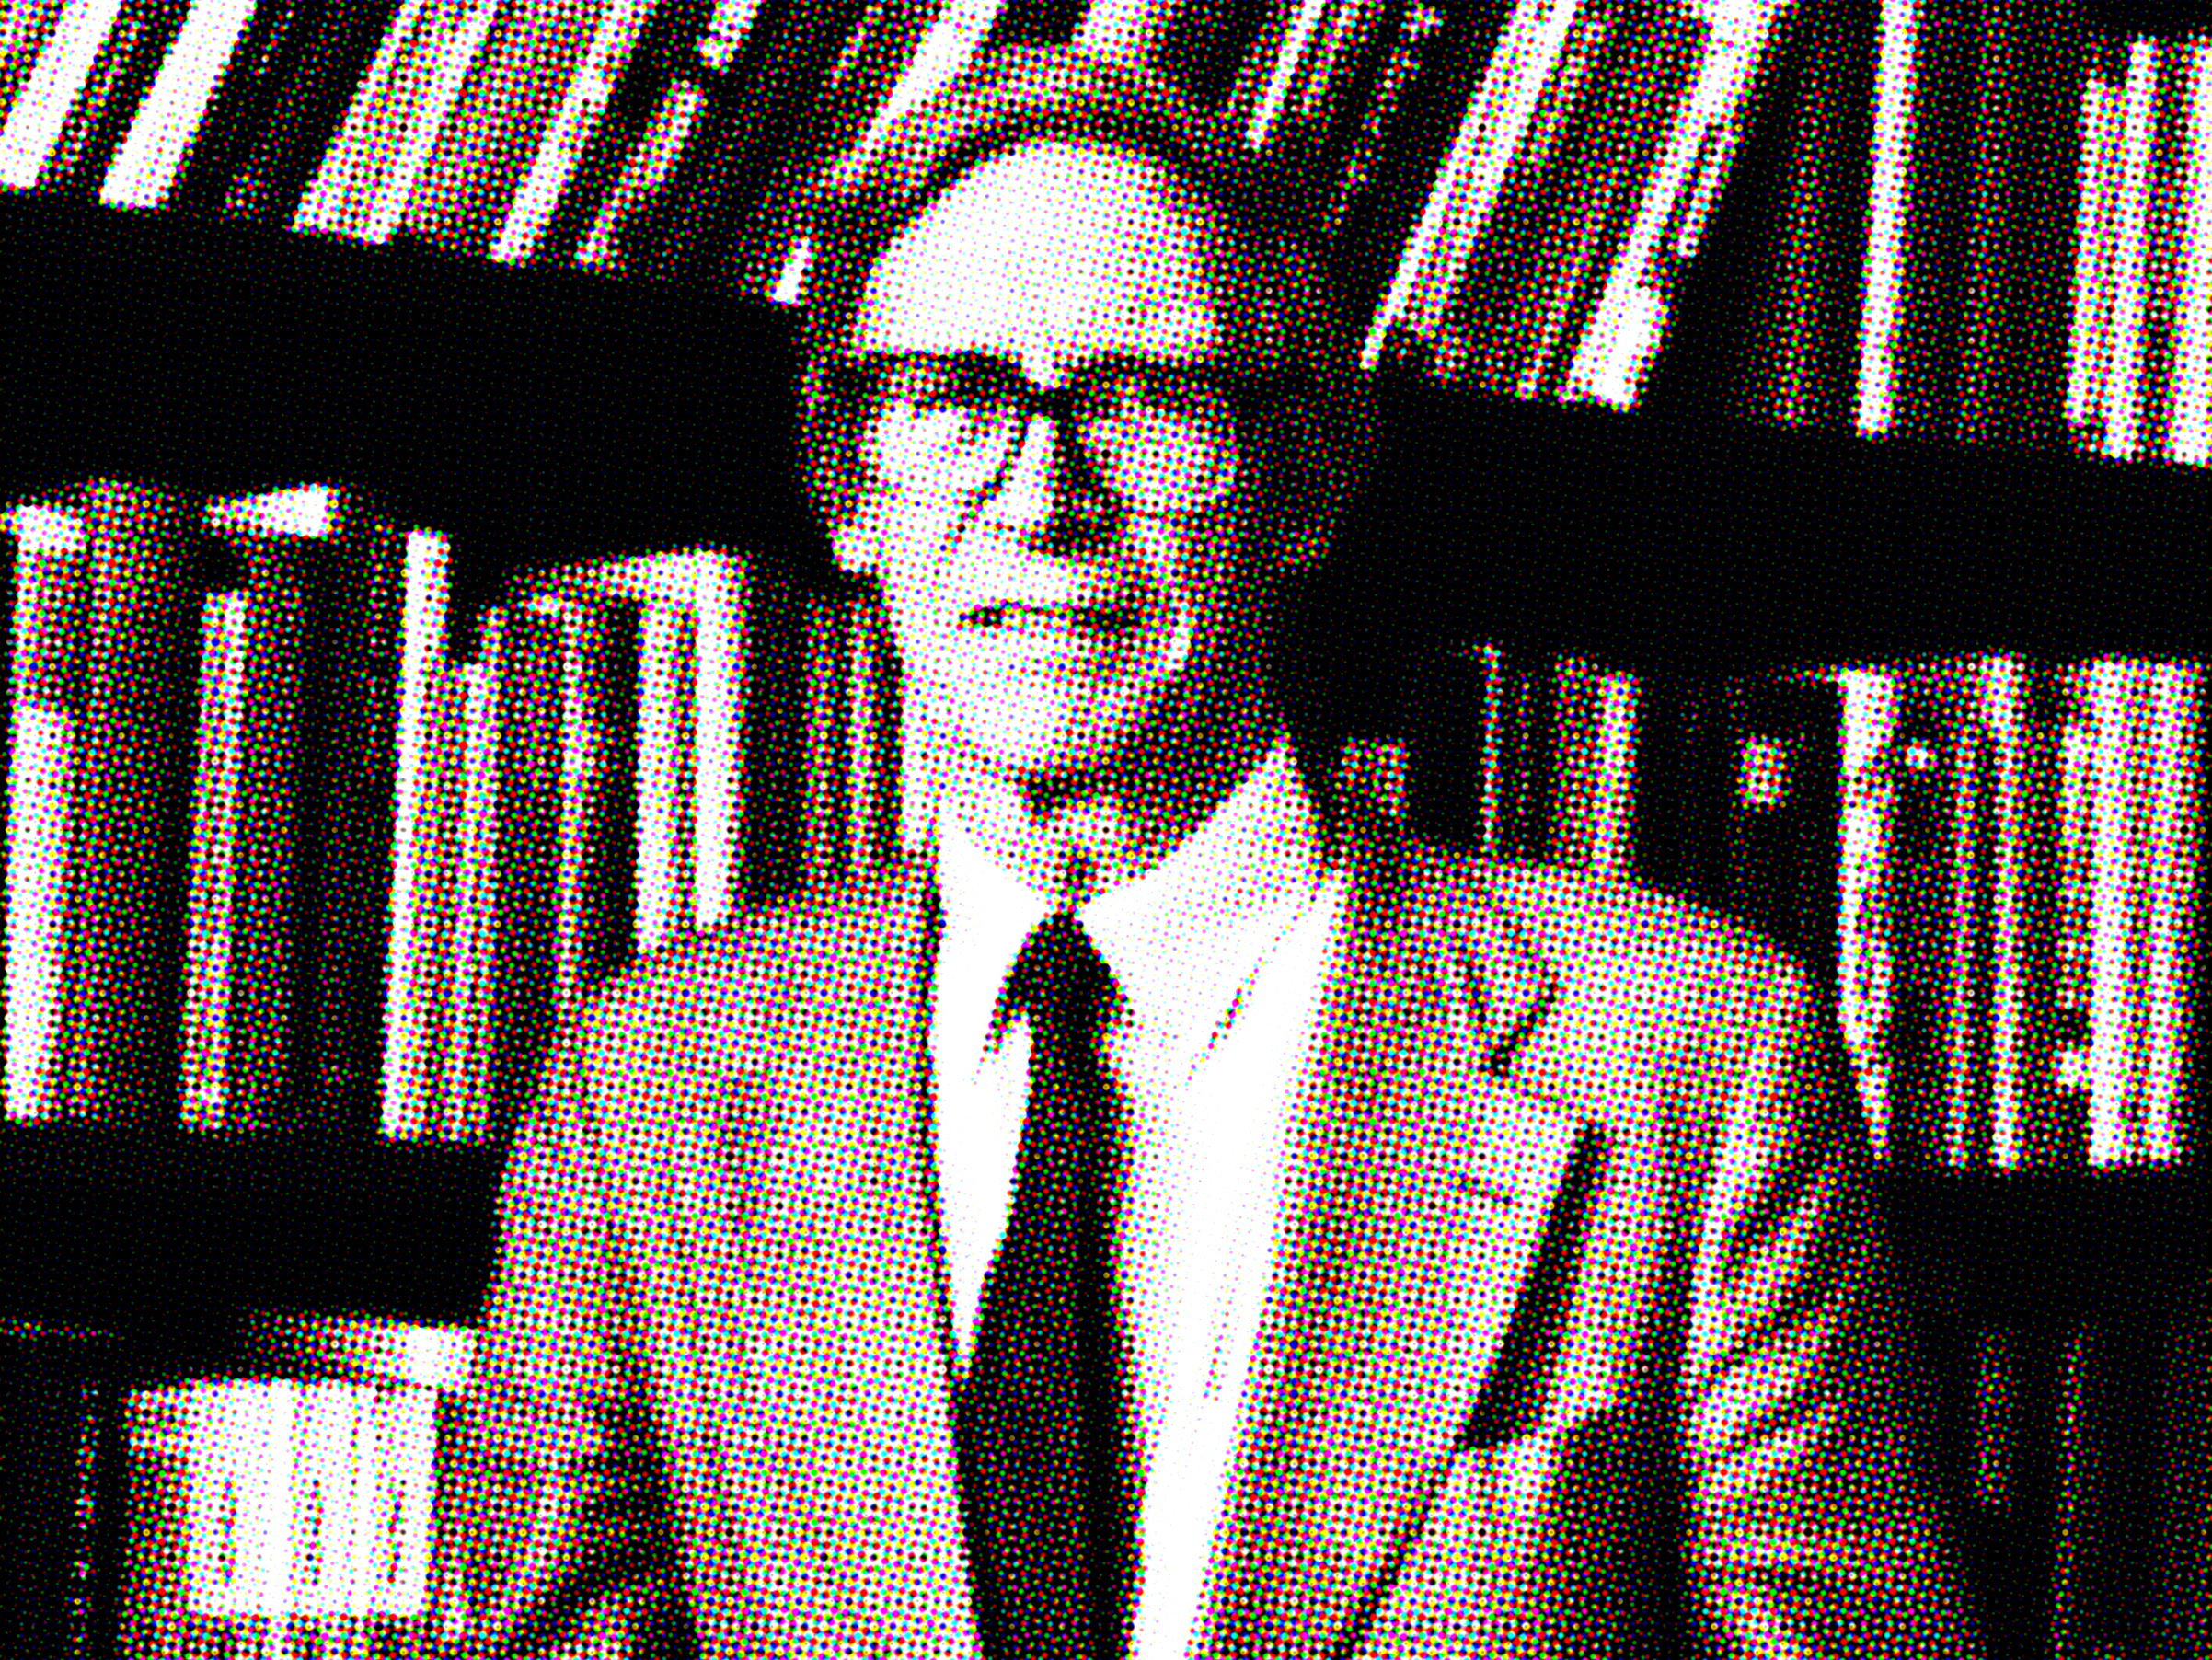 What Do We Need To Do To Achieve a Just Peace? A “Conversation” with John Rawls